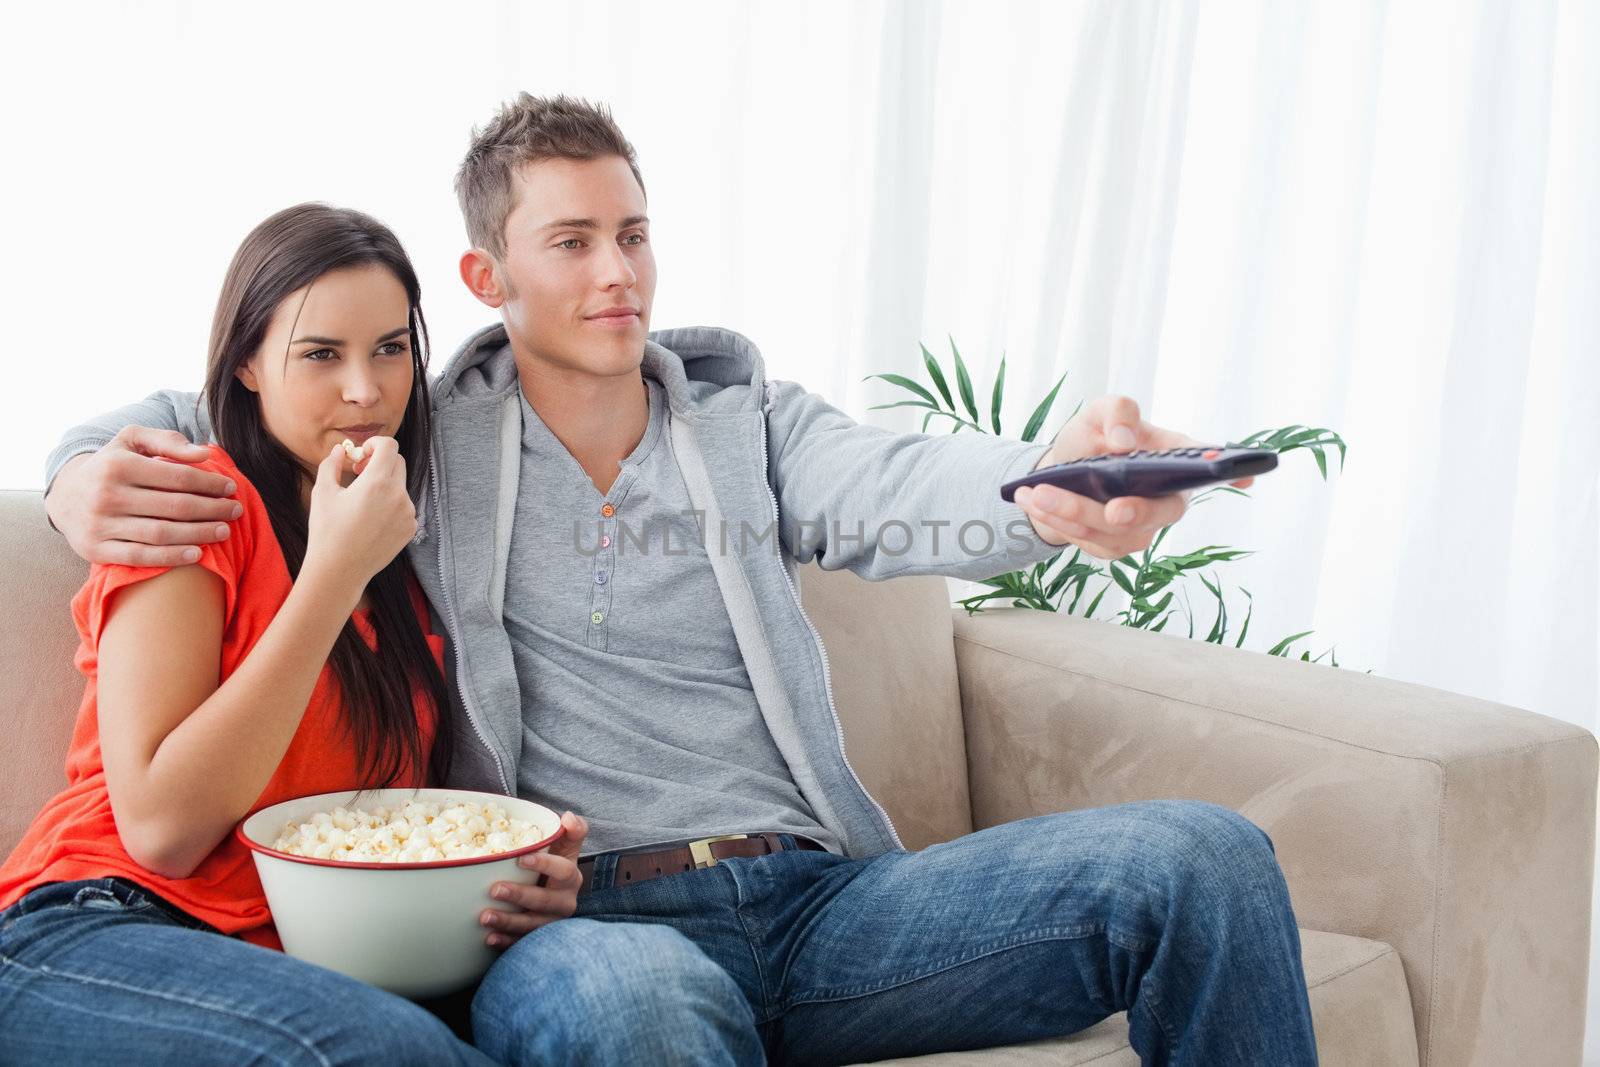 A couple sitting together embracing as they watch tv and eat pop by Wavebreakmedia